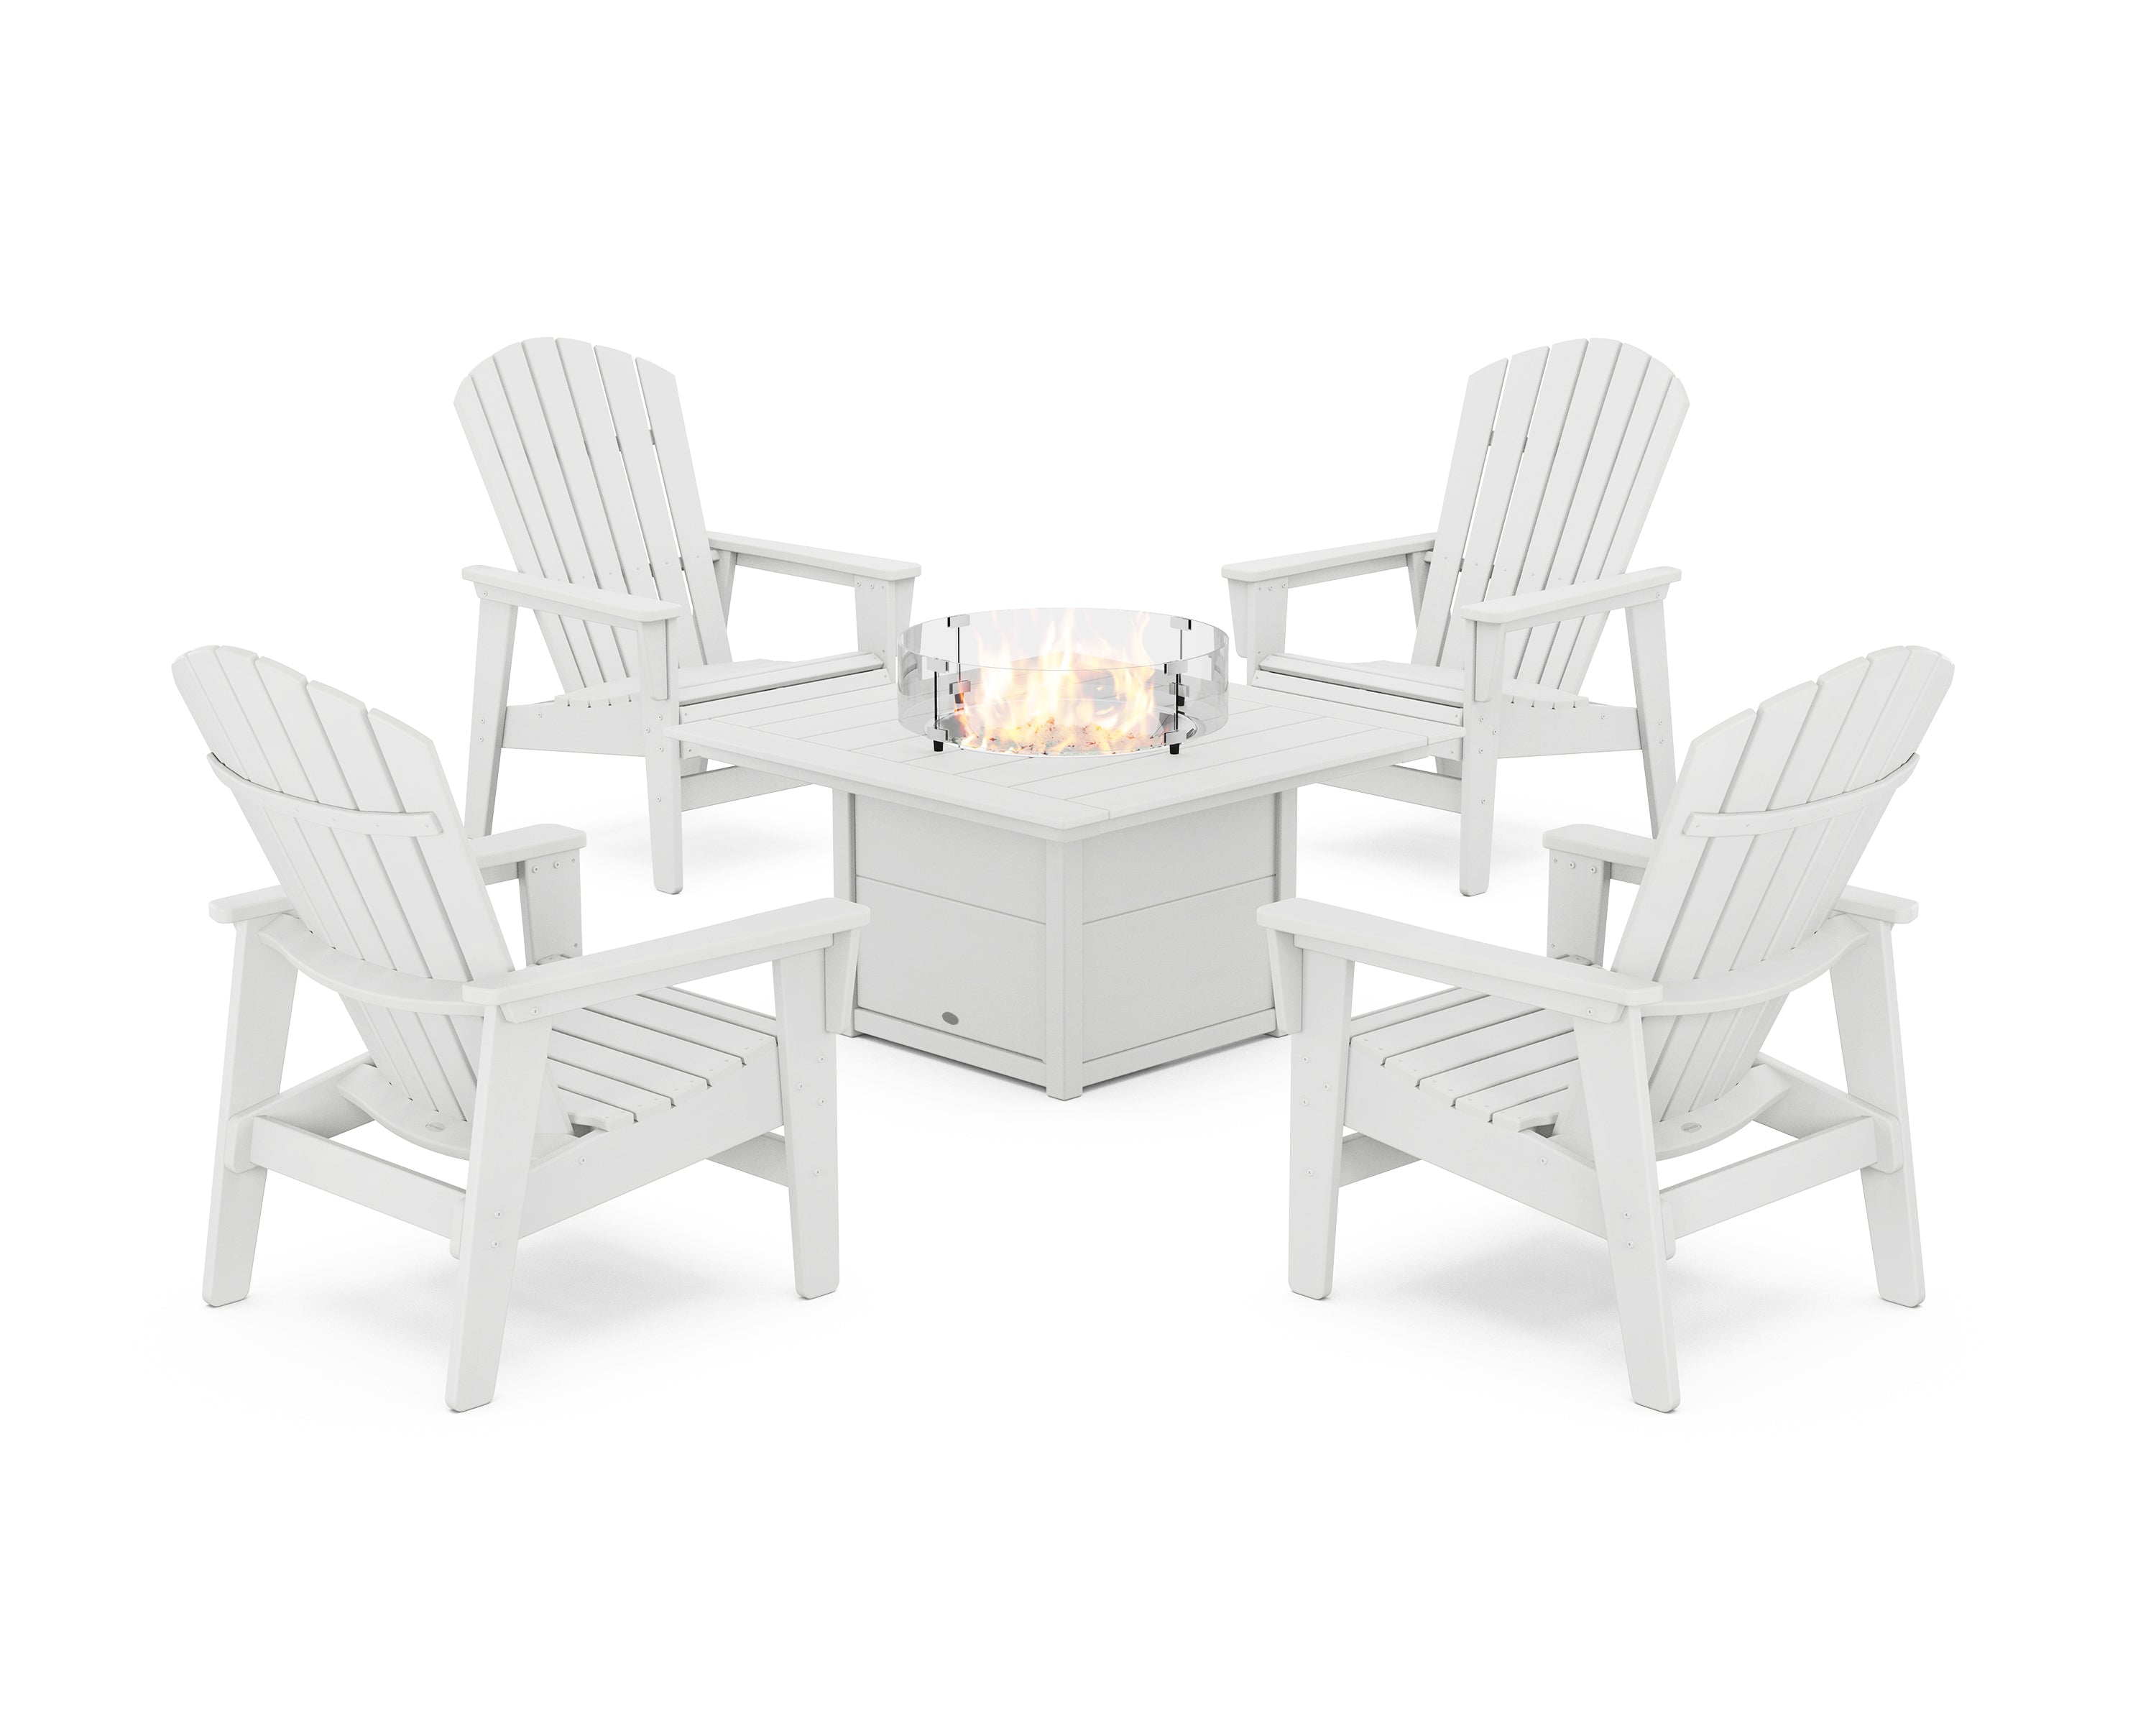 POLYWOOD® 5-Piece Nautical Grand Upright Adirondack Conversation Set with Fire Pit Table in White